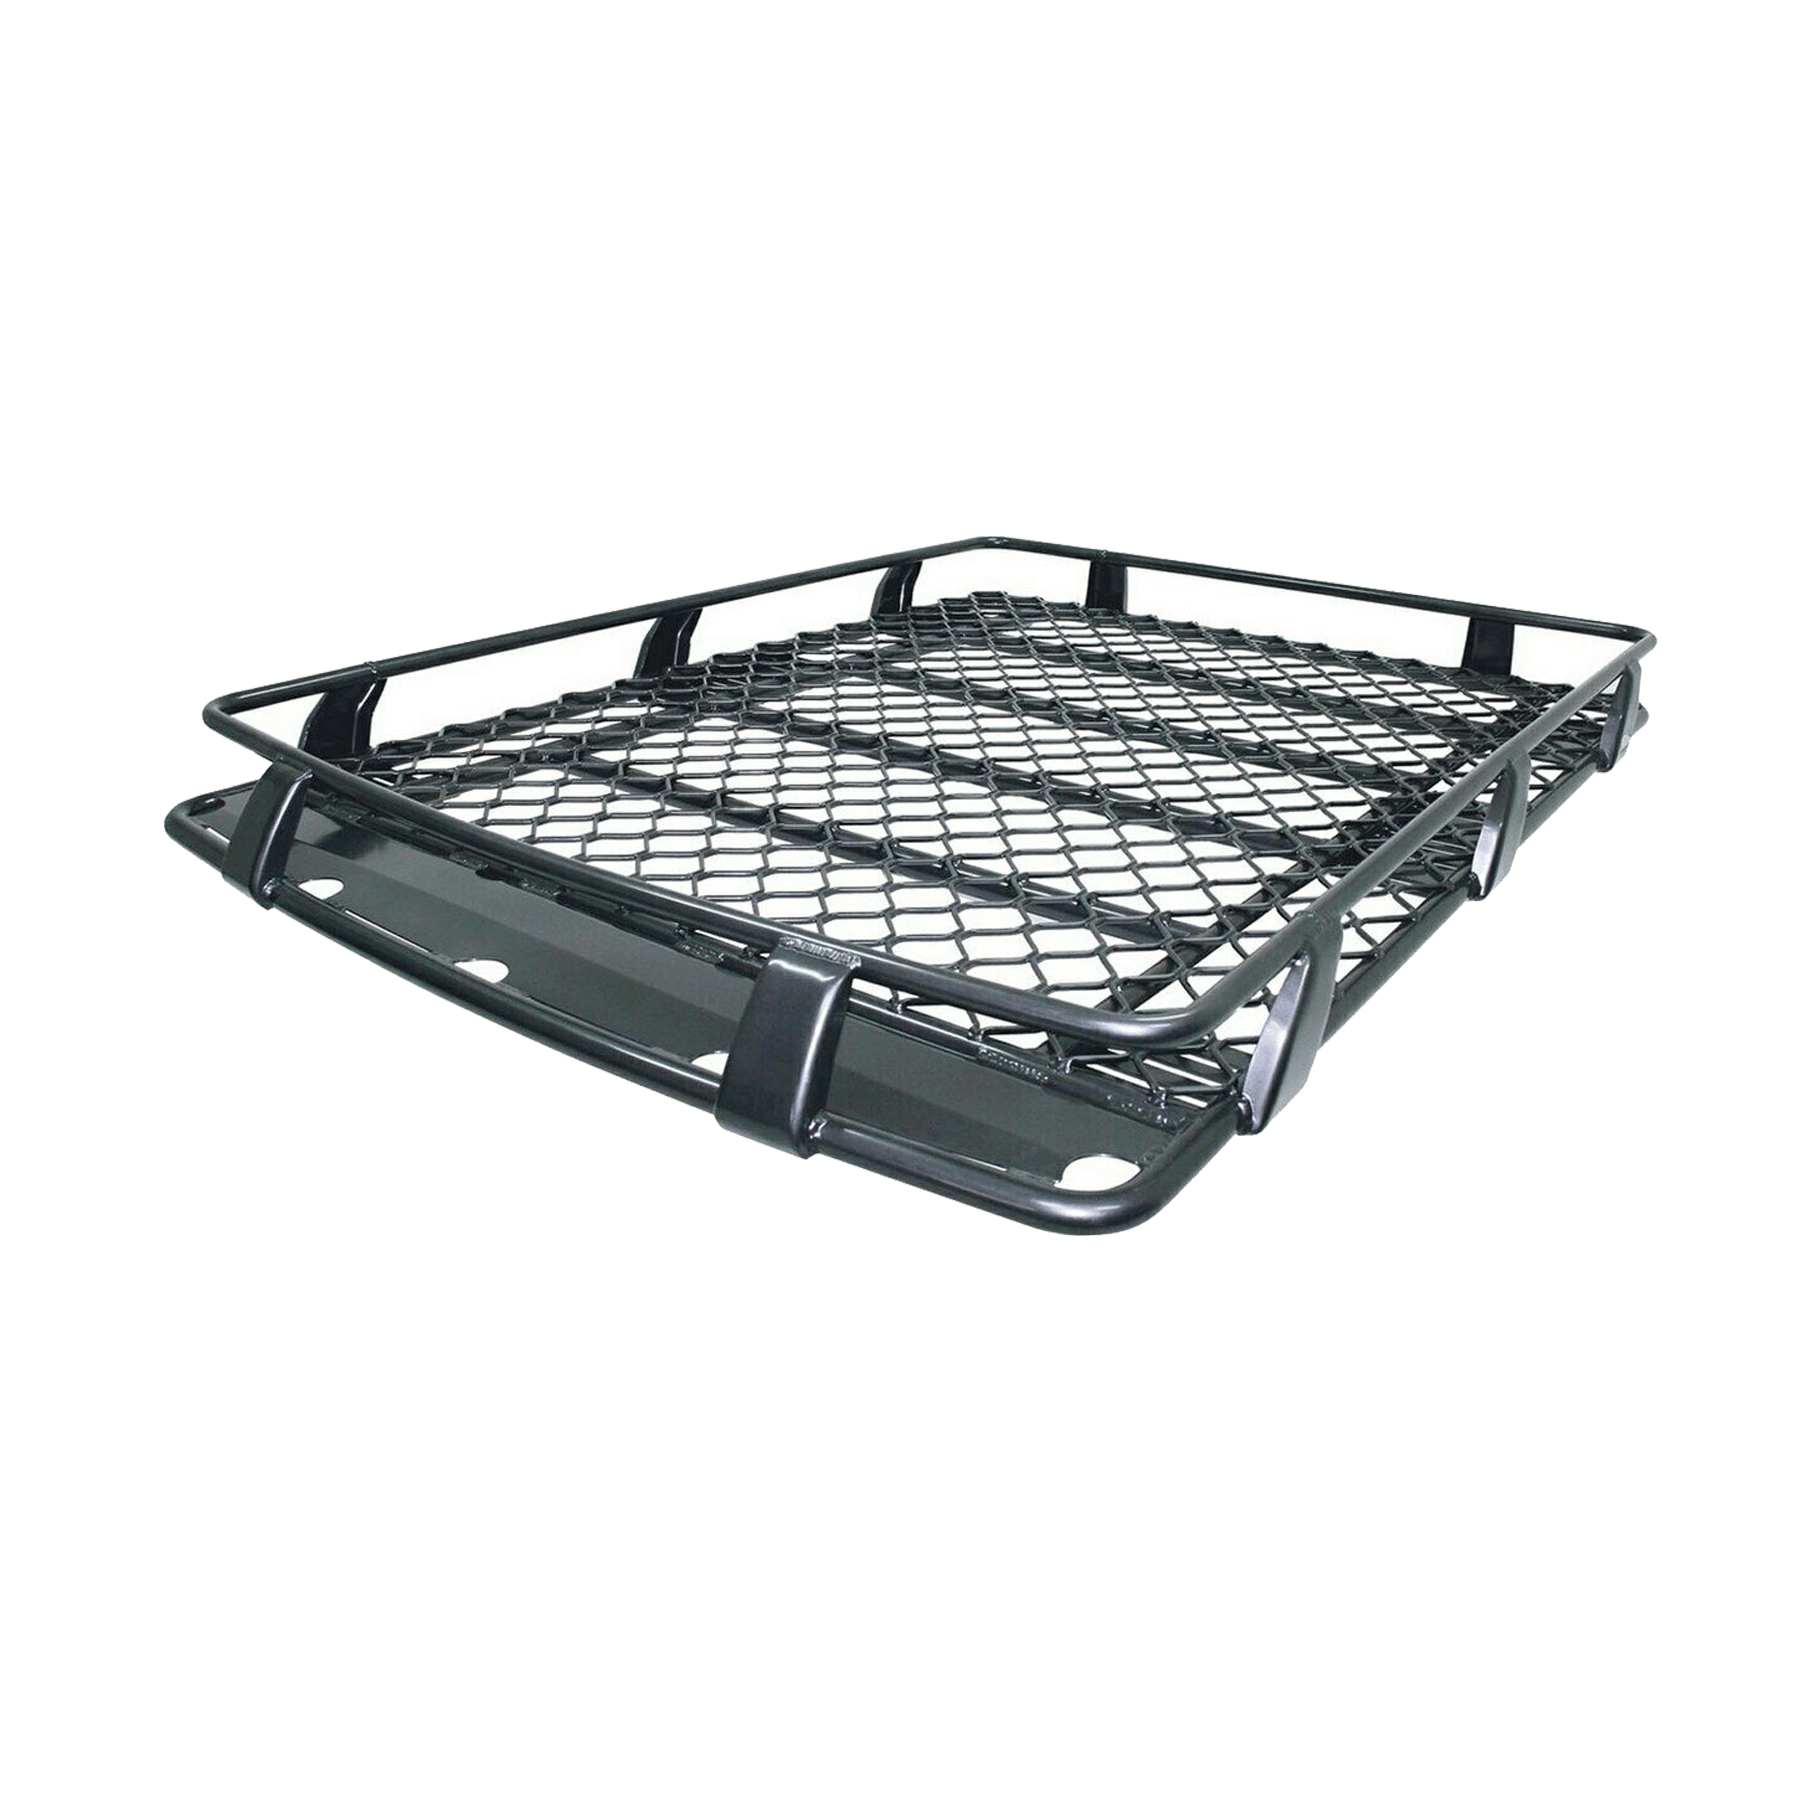 LANDCRUISER 80 SERIES 1990 TO 1998 BASKET ALLOY ROOF RACK- 1.8M X 1.25M (OPEN END)